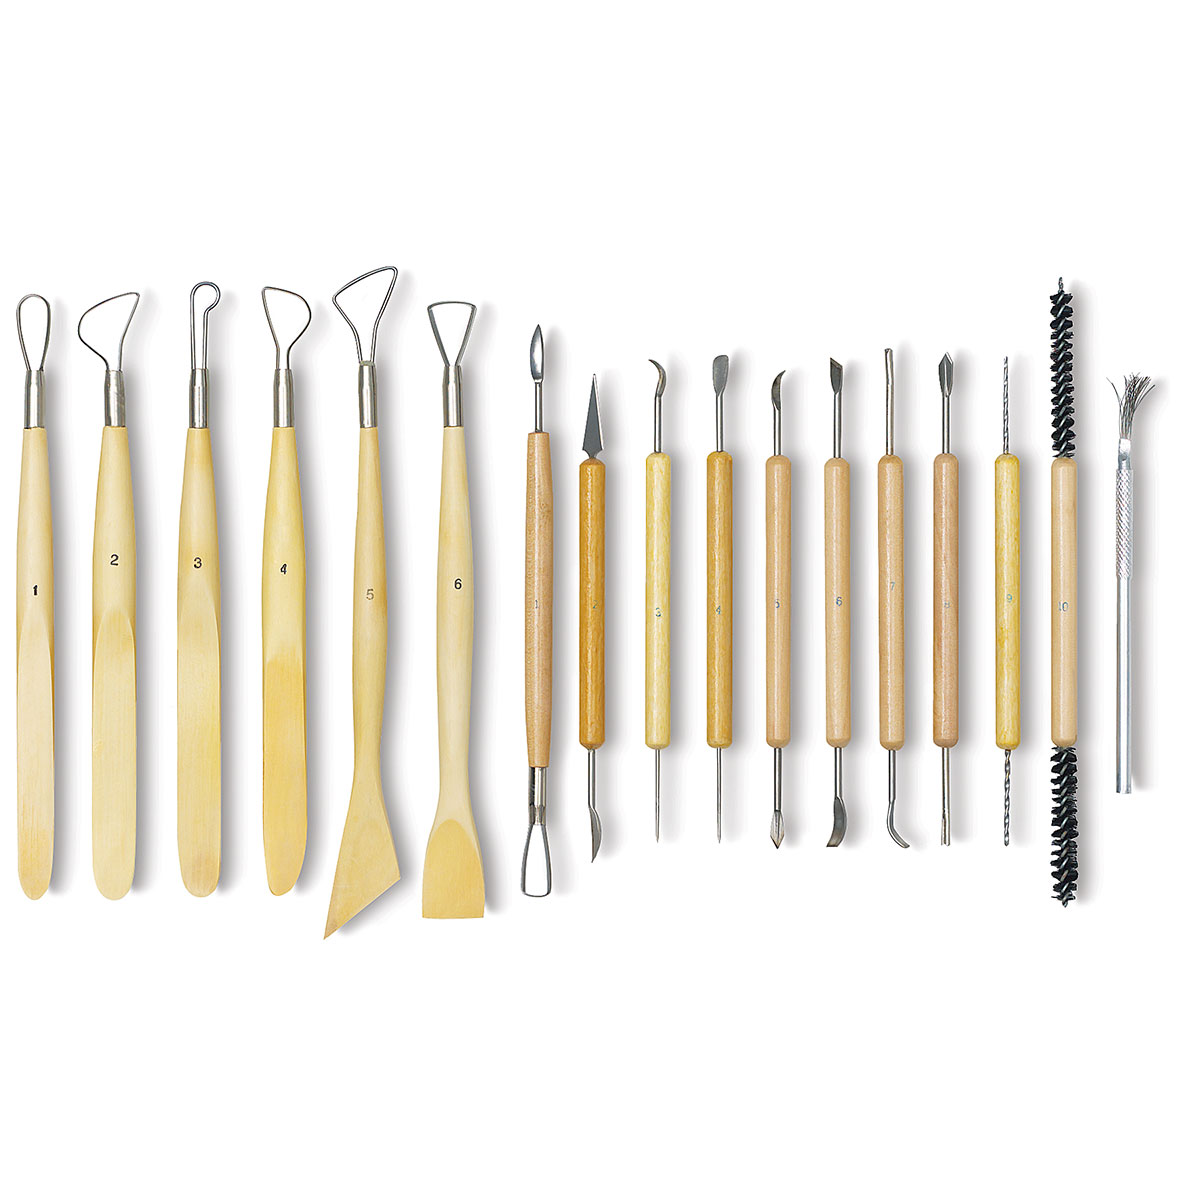 THR3E STROKES Set of 8 Plastic Clay Tools Modeling Clay Tools for Kids  Shaping and Sculpting - Set of 8 Plastic Clay Tools Modeling Clay Tools for  Kids Shaping and Sculpting .